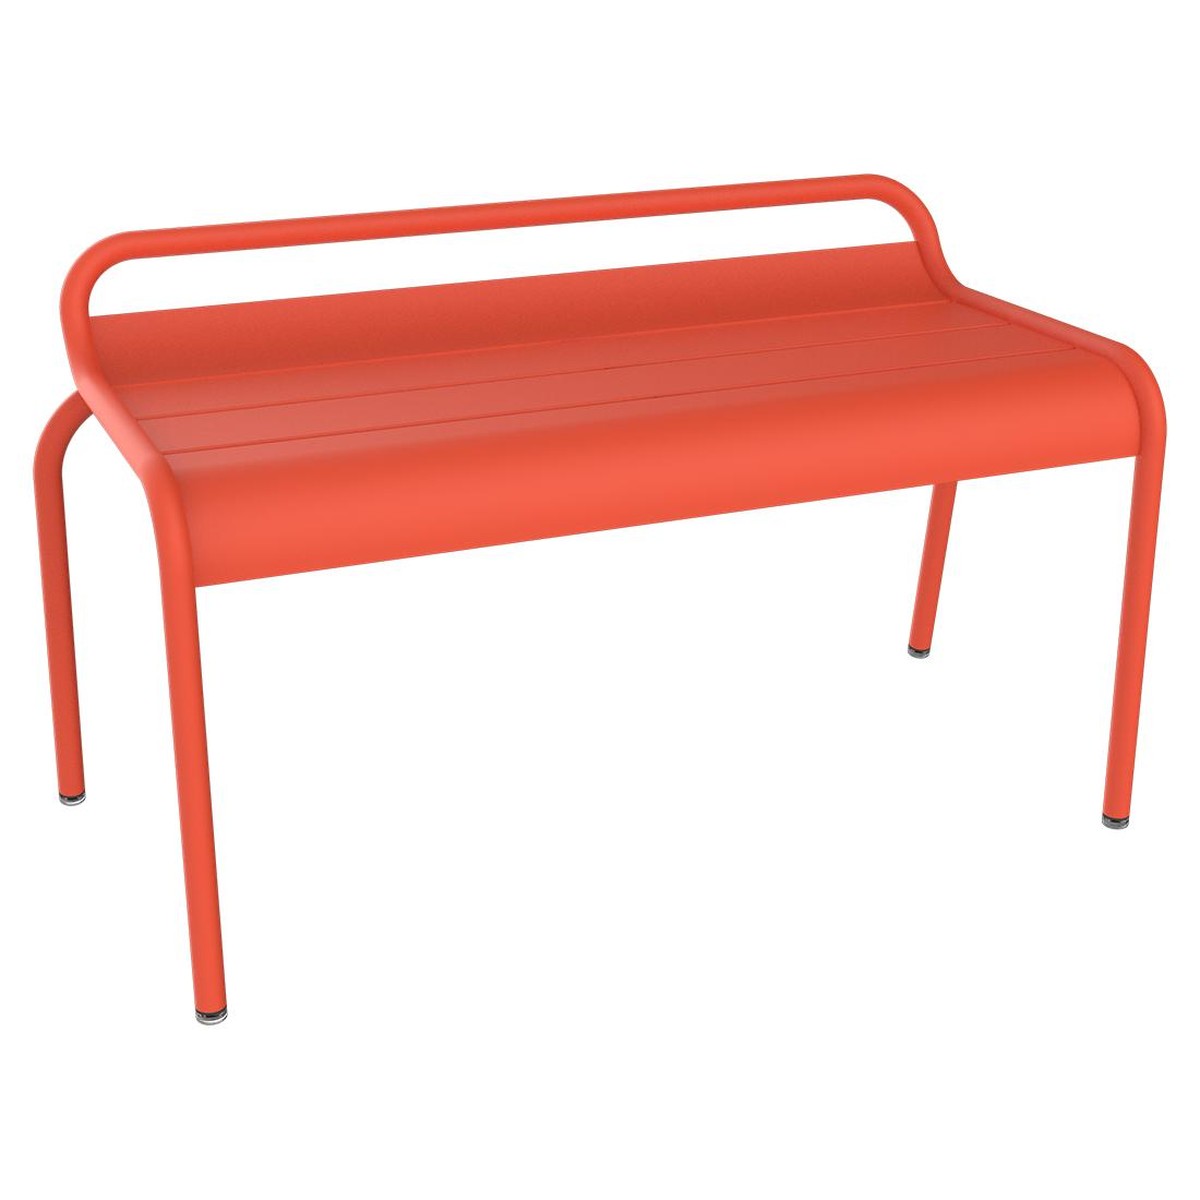 Fermob Luxembourg Banc Compact Luxembourg Rouge saumon L 118 x l 56 x H86cm